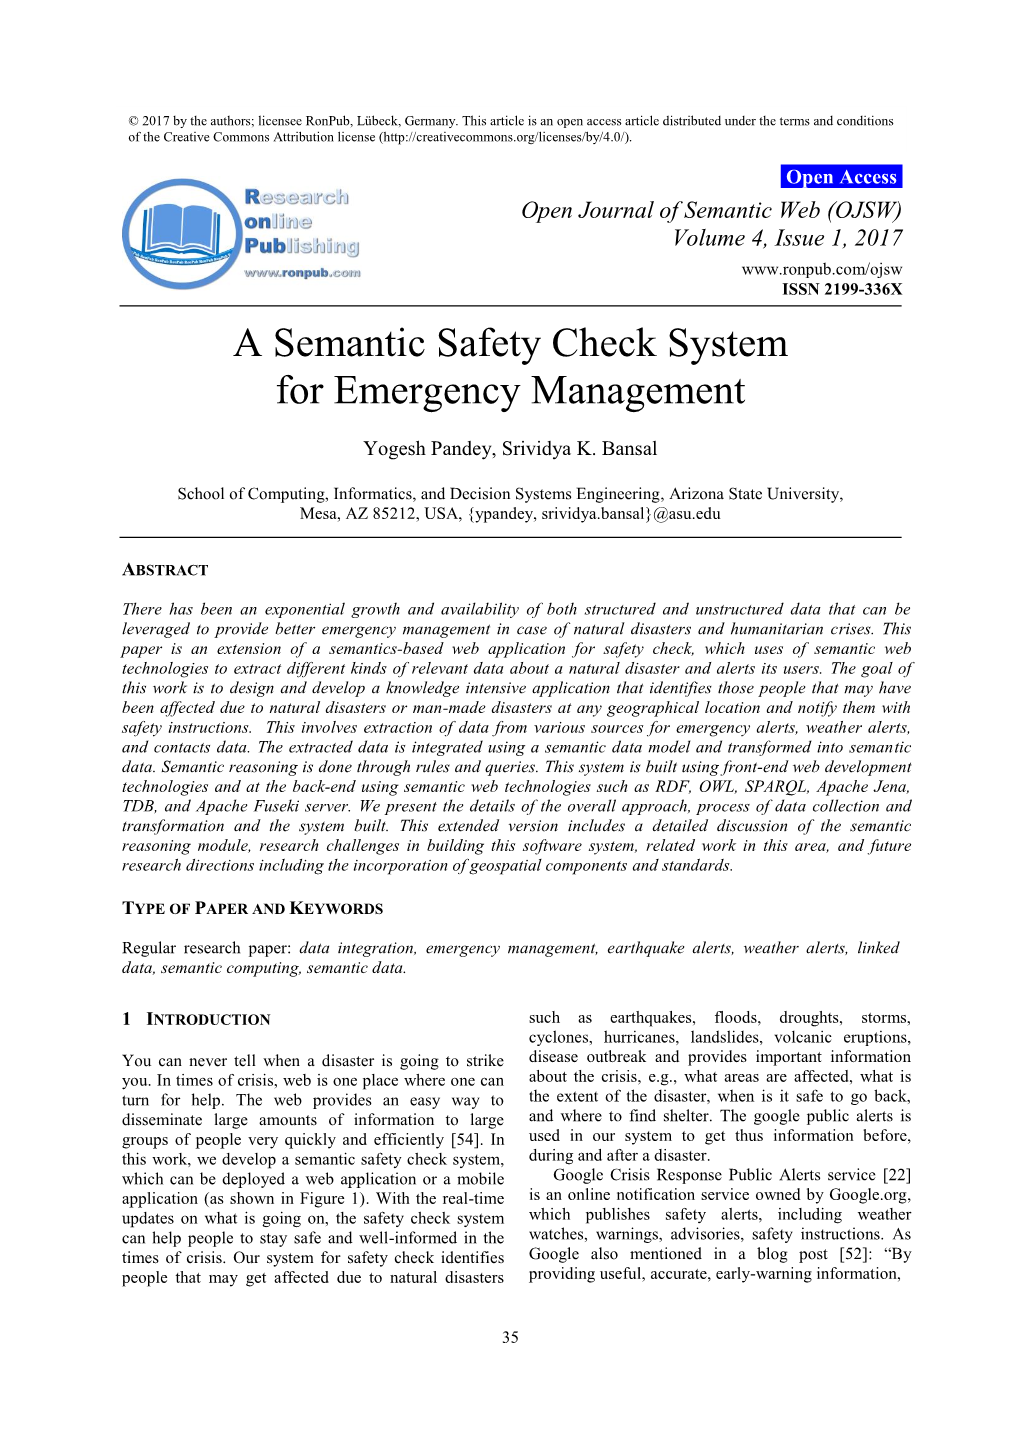 A Semantic Safety Check System for Emergency Management of the Creative Commons Attribution License (